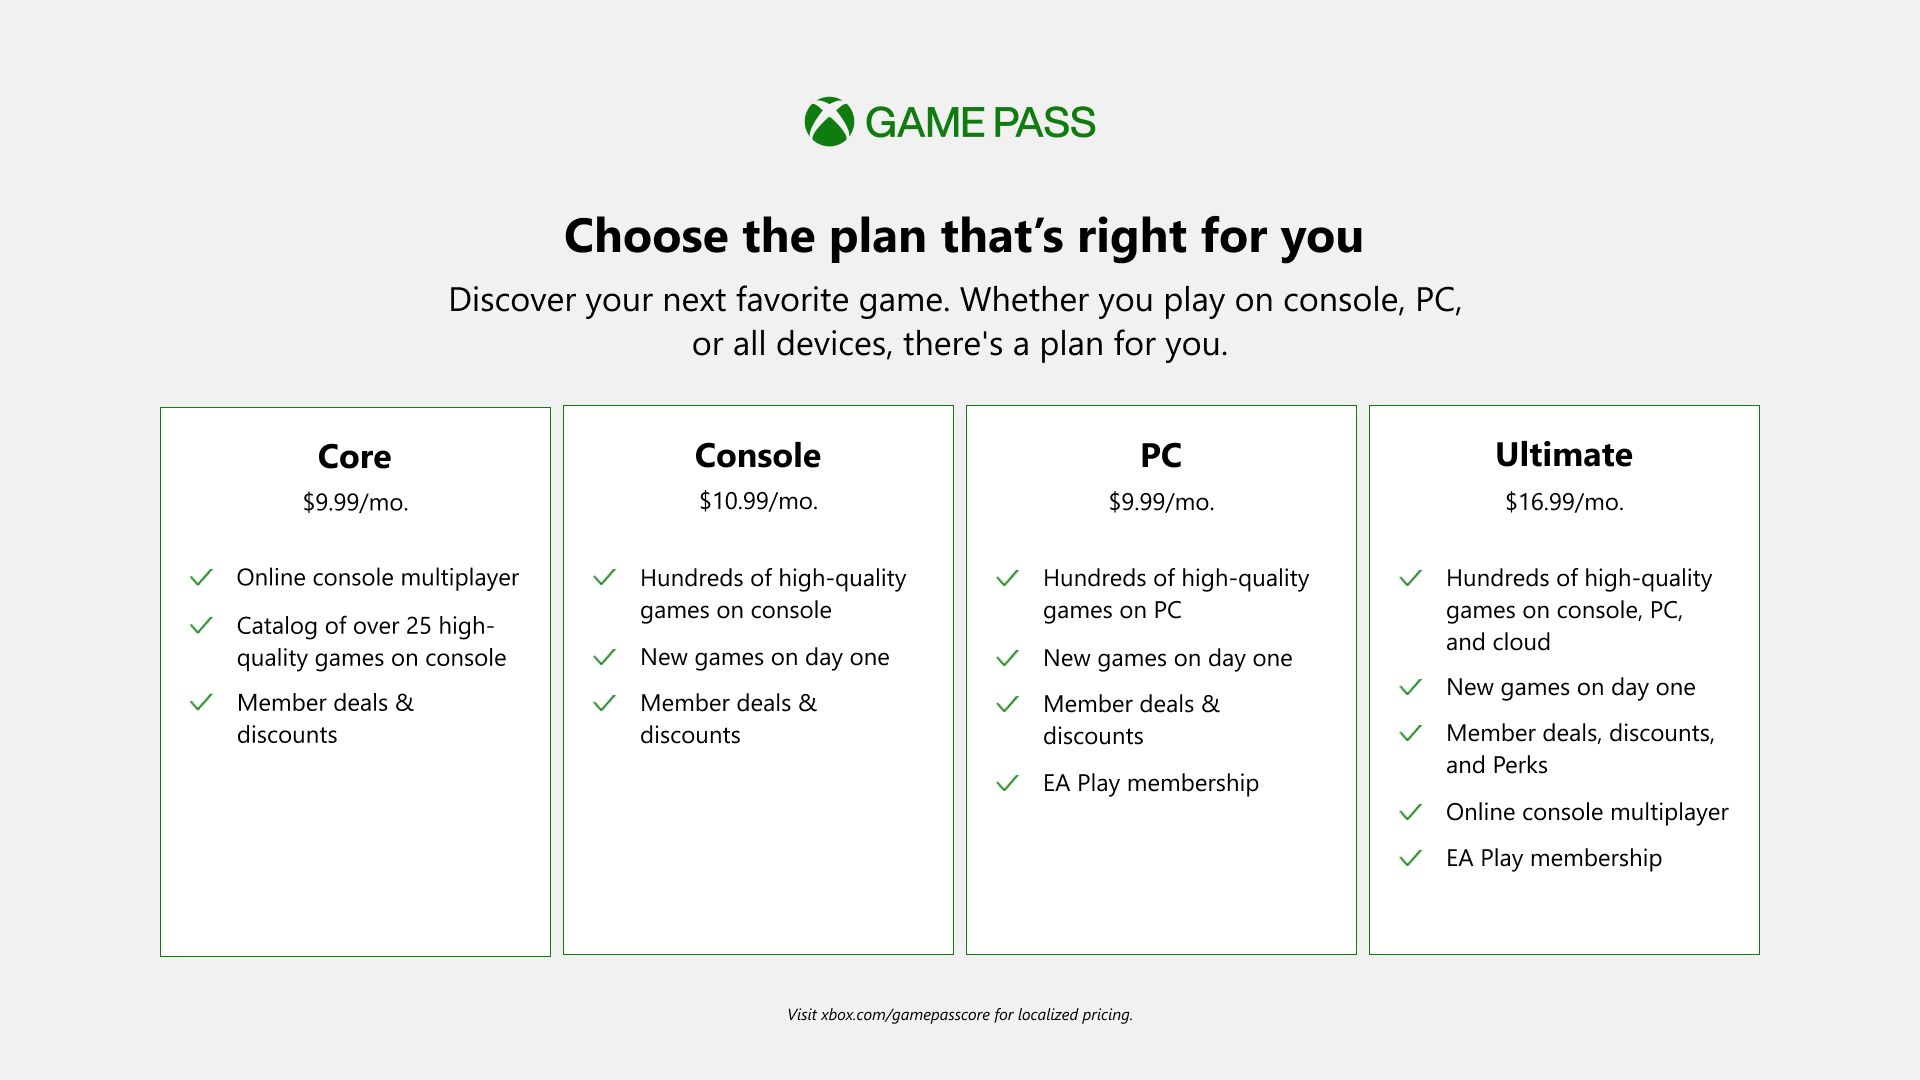 Everything You Get When Choosing the New Xbox Game Pass Core!